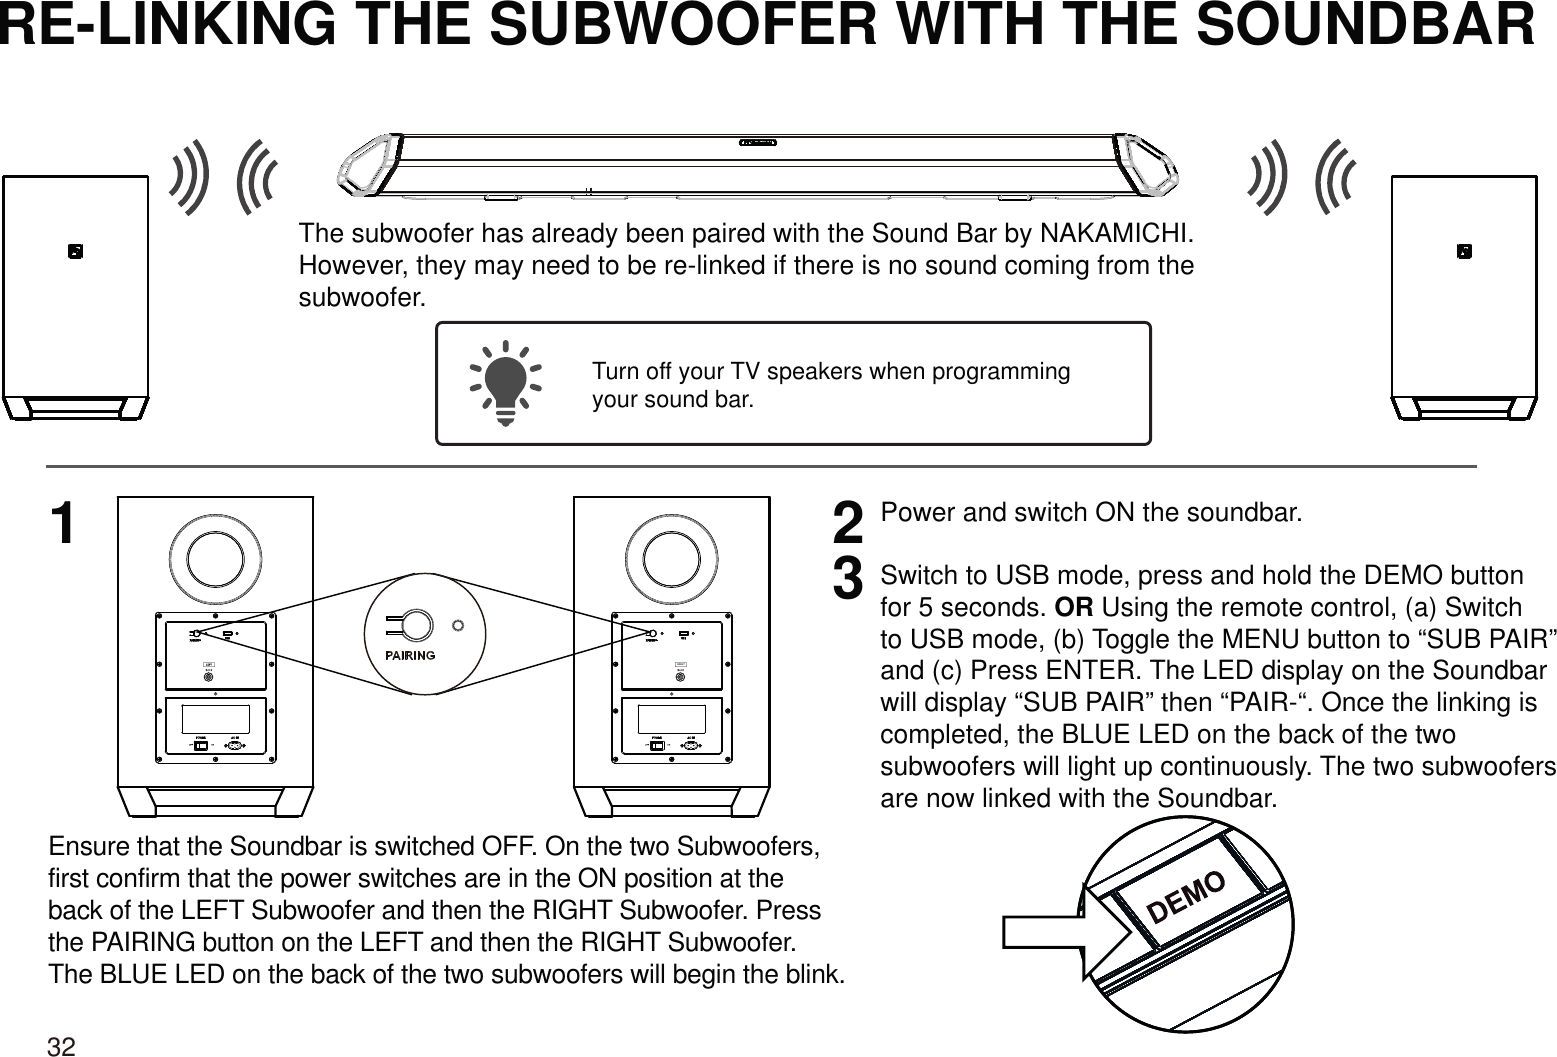 RE-LINKING THE SUBWOOFER WITH THE SOUNDBAR123Power and switch ON the soundbar. Turn off your TV speakers when programmingyour sound bar.The subwoofer has already been paired with the Sound Bar by NAKAMICHI.However, they may need to be re-linked if there is no sound coming from thesubwoofer.RIGHTEnsure that the Soundbar is switched OFF. On the two Subwoofers, first confirm that the power switches are in the ON position at the back of the LEFT Subwoofer and then the RIGHT Subwoofer. Press the PAIRING button on the LEFT and then the RIGHT Subwoofer. The BLUE LED on the back of the two subwoofers will begin the blink.Switch to USB mode, press and hold the DEMO button for 5 seconds. OR Using the remote control, (a) Switch to USB mode, (b) Toggle the MENU button to “SUB PAIR” and (c) Press ENTER. The LED display on the Soundbar will display “SUB PAIR” then “PAIR-“. Once the linking is completed, the BLUE LED on the back of the two subwoofers will light up continuously. The two subwoofers are now linked with the Soundbar.32